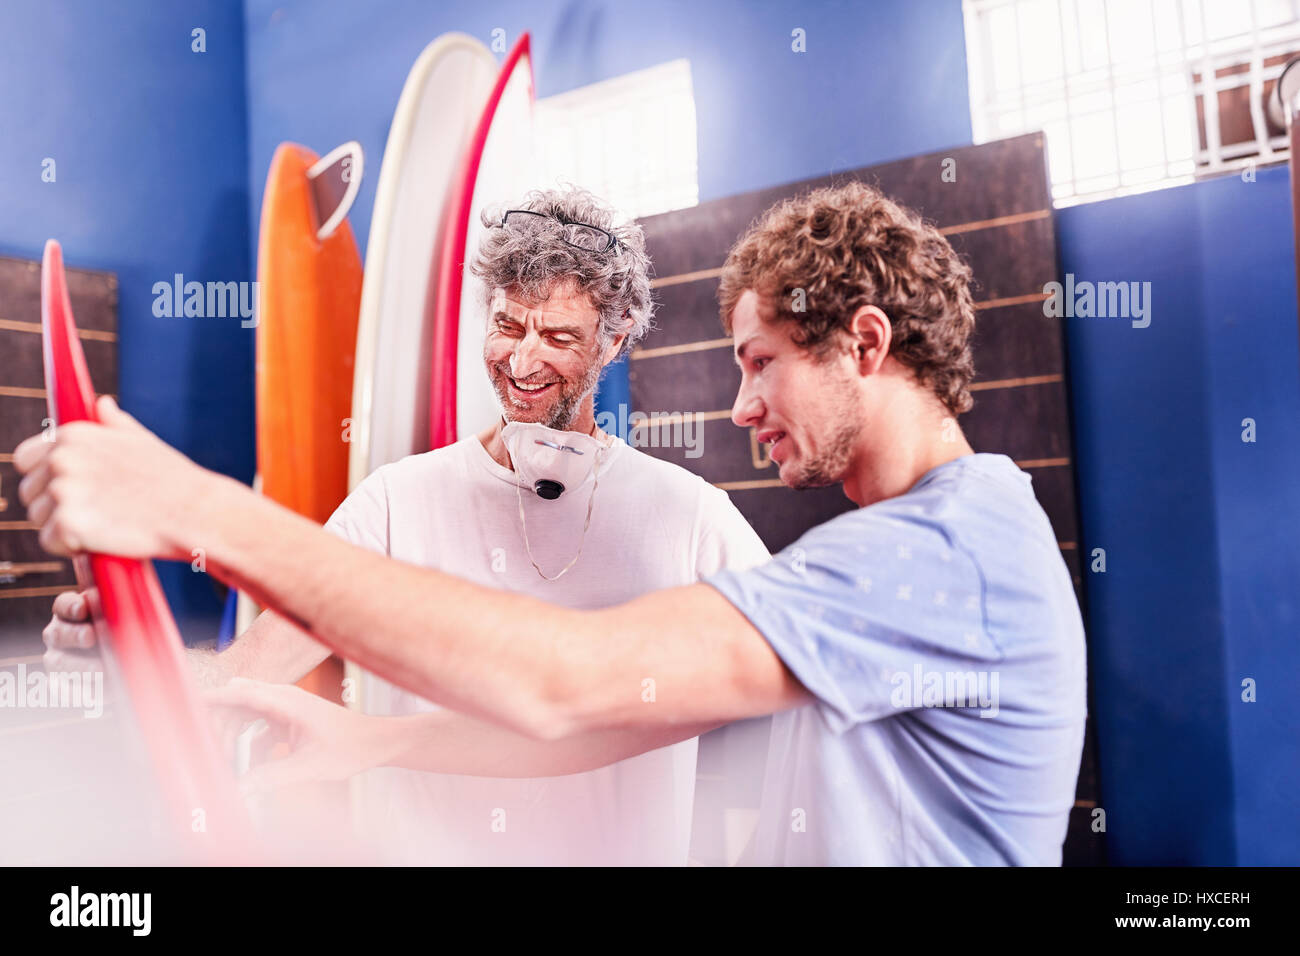 Men making and discussing surfboards in workshop Stock Photo